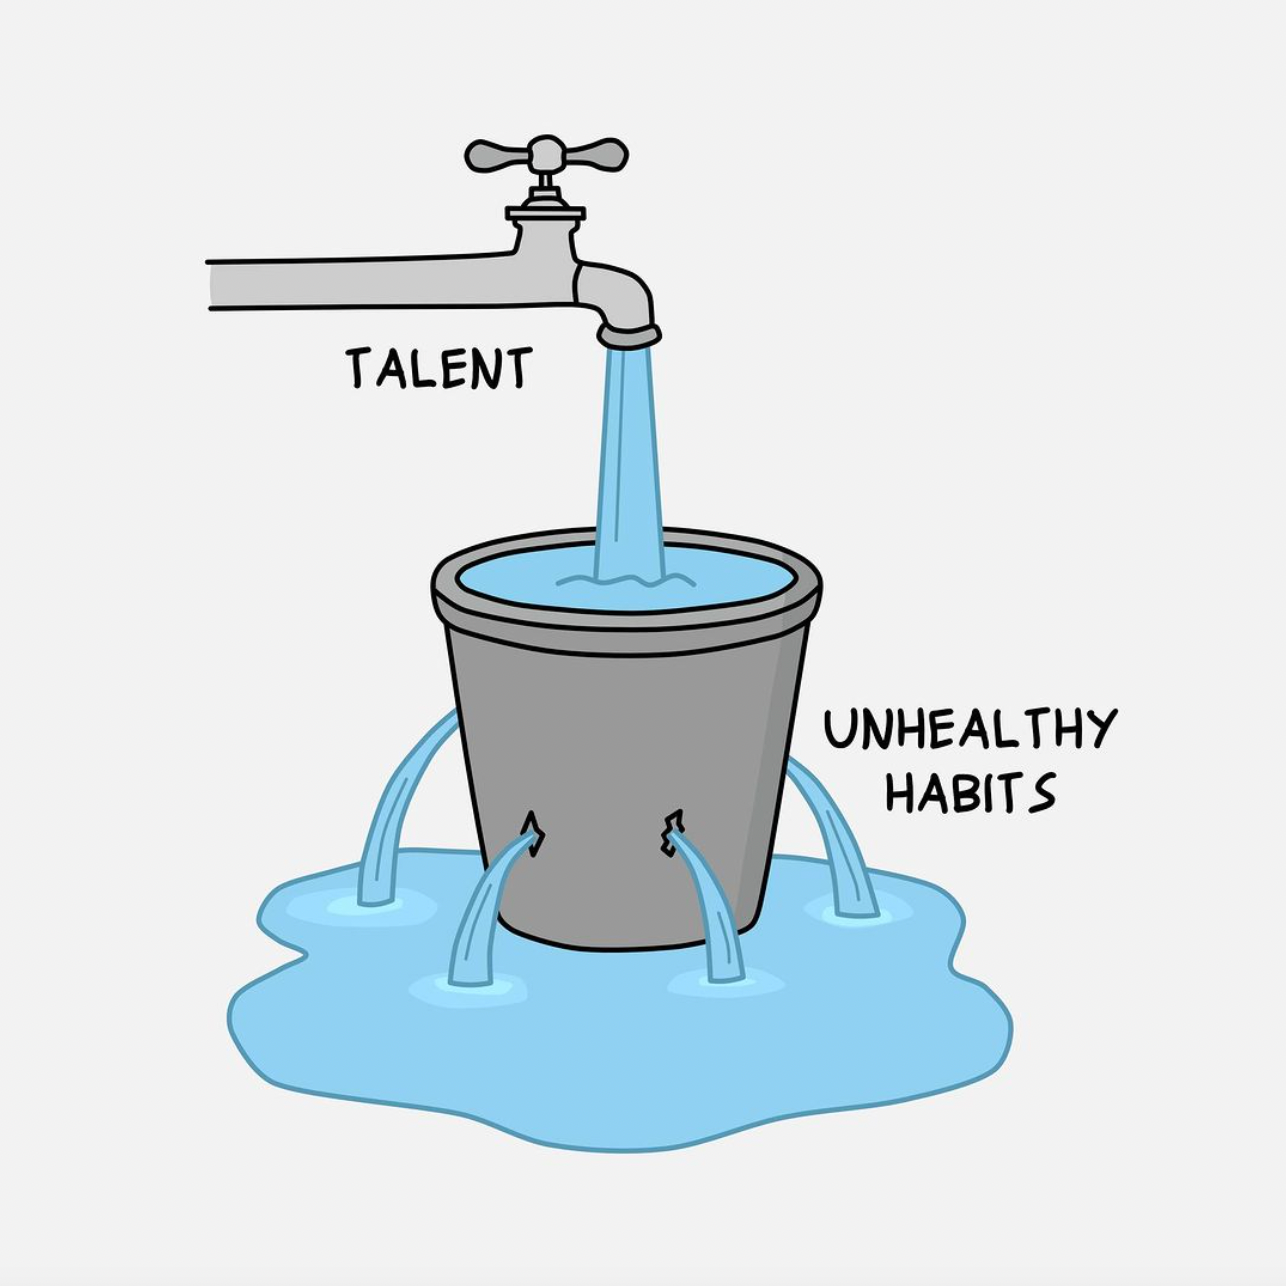 Monday Inspiration: Talent is a leaky bucket without good habits to hold it